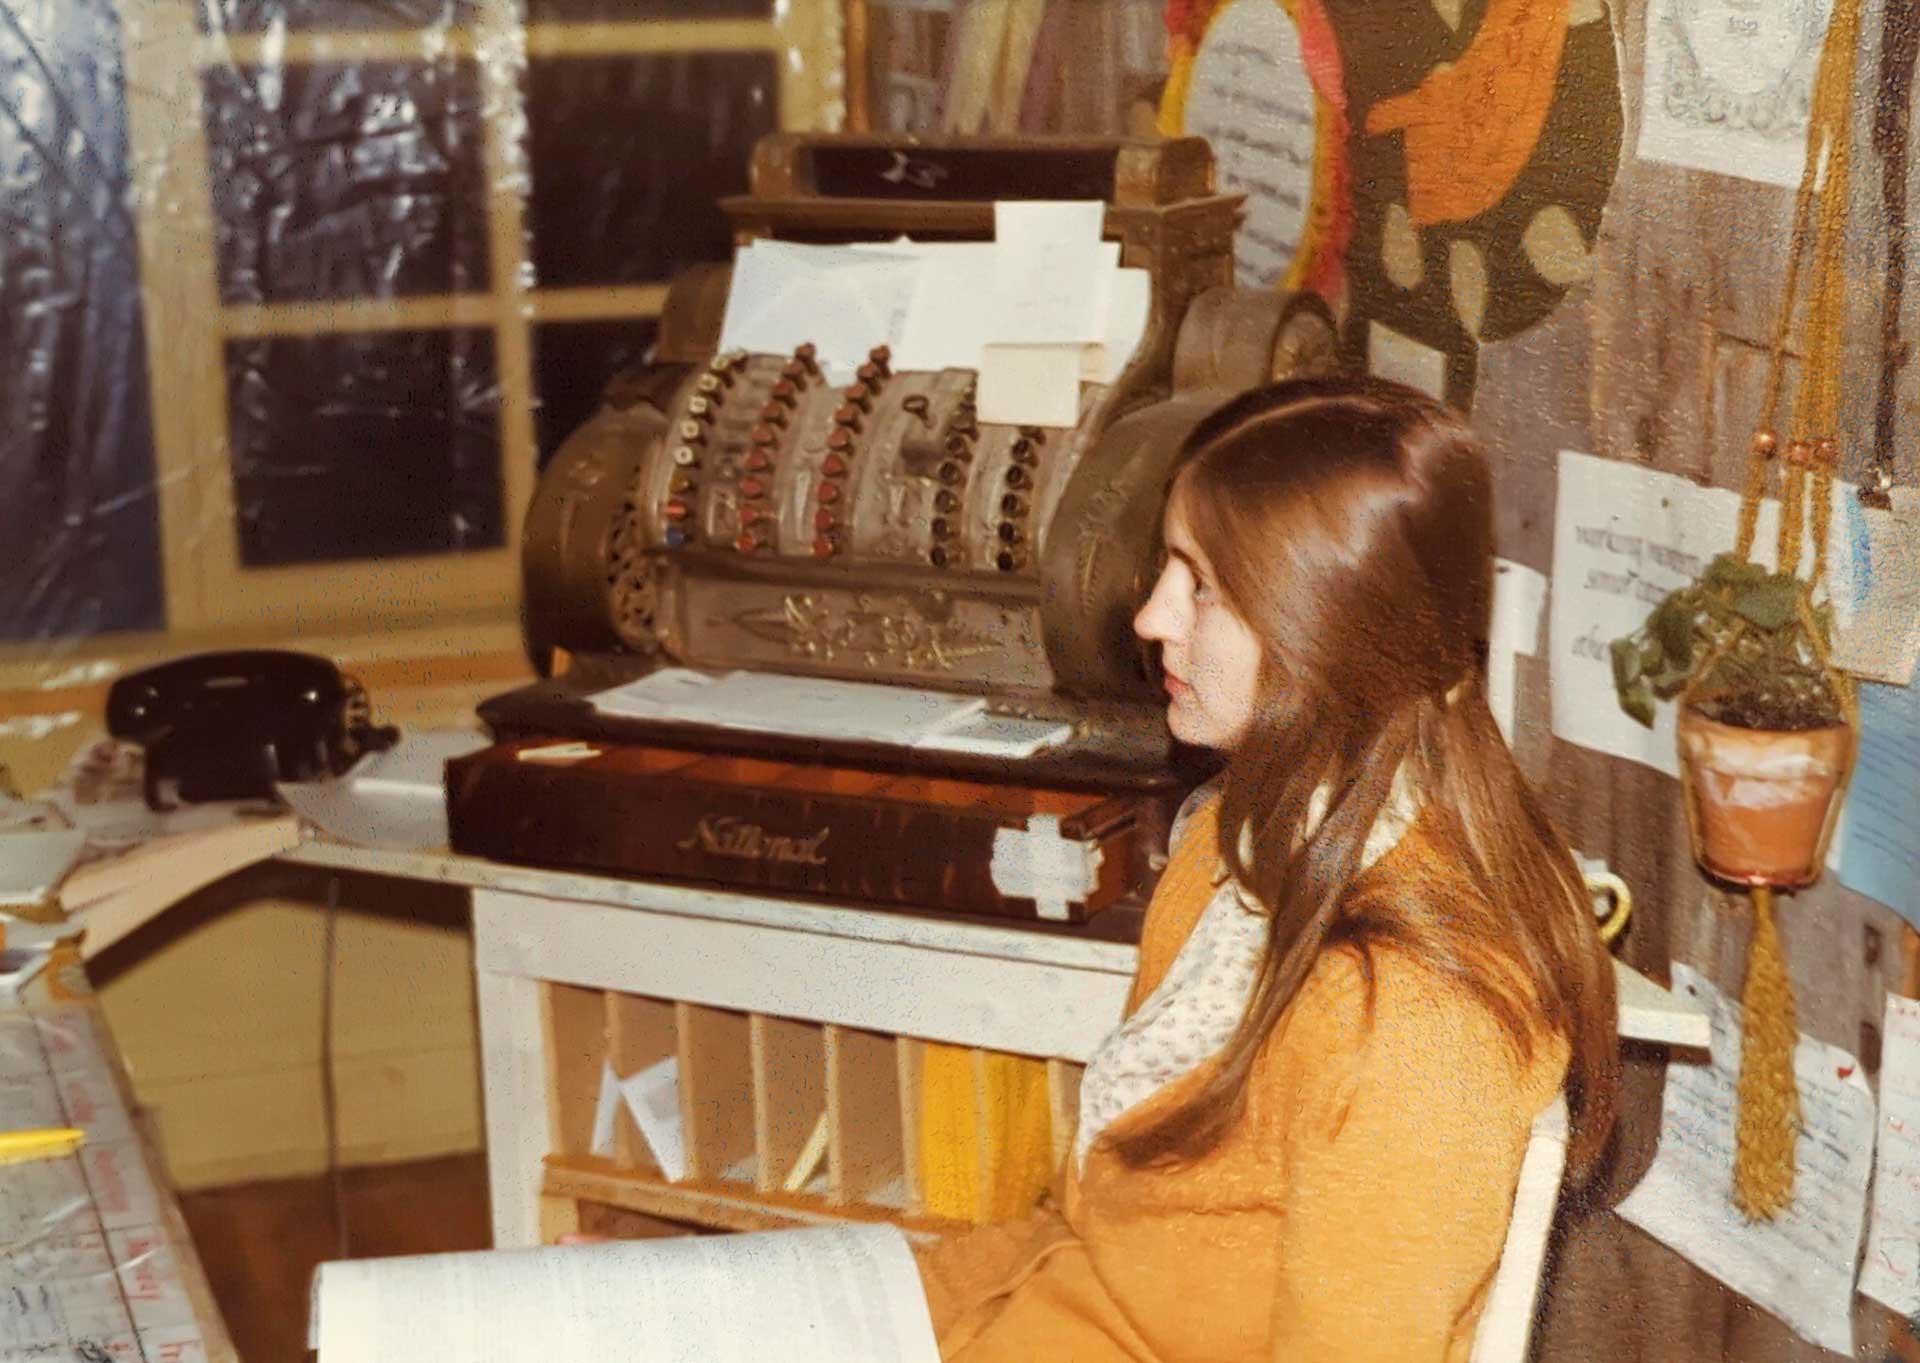 A woman with long brown hair, wearing a mustard-colored outfit and scarf, sits beside an antique cash register. The background includes a telephone, various papers, and a potted plant hanging on the wall. The setting gives off vibes of a vintage office or shop reminiscent of the Whole Foods Coop Duluth MN.